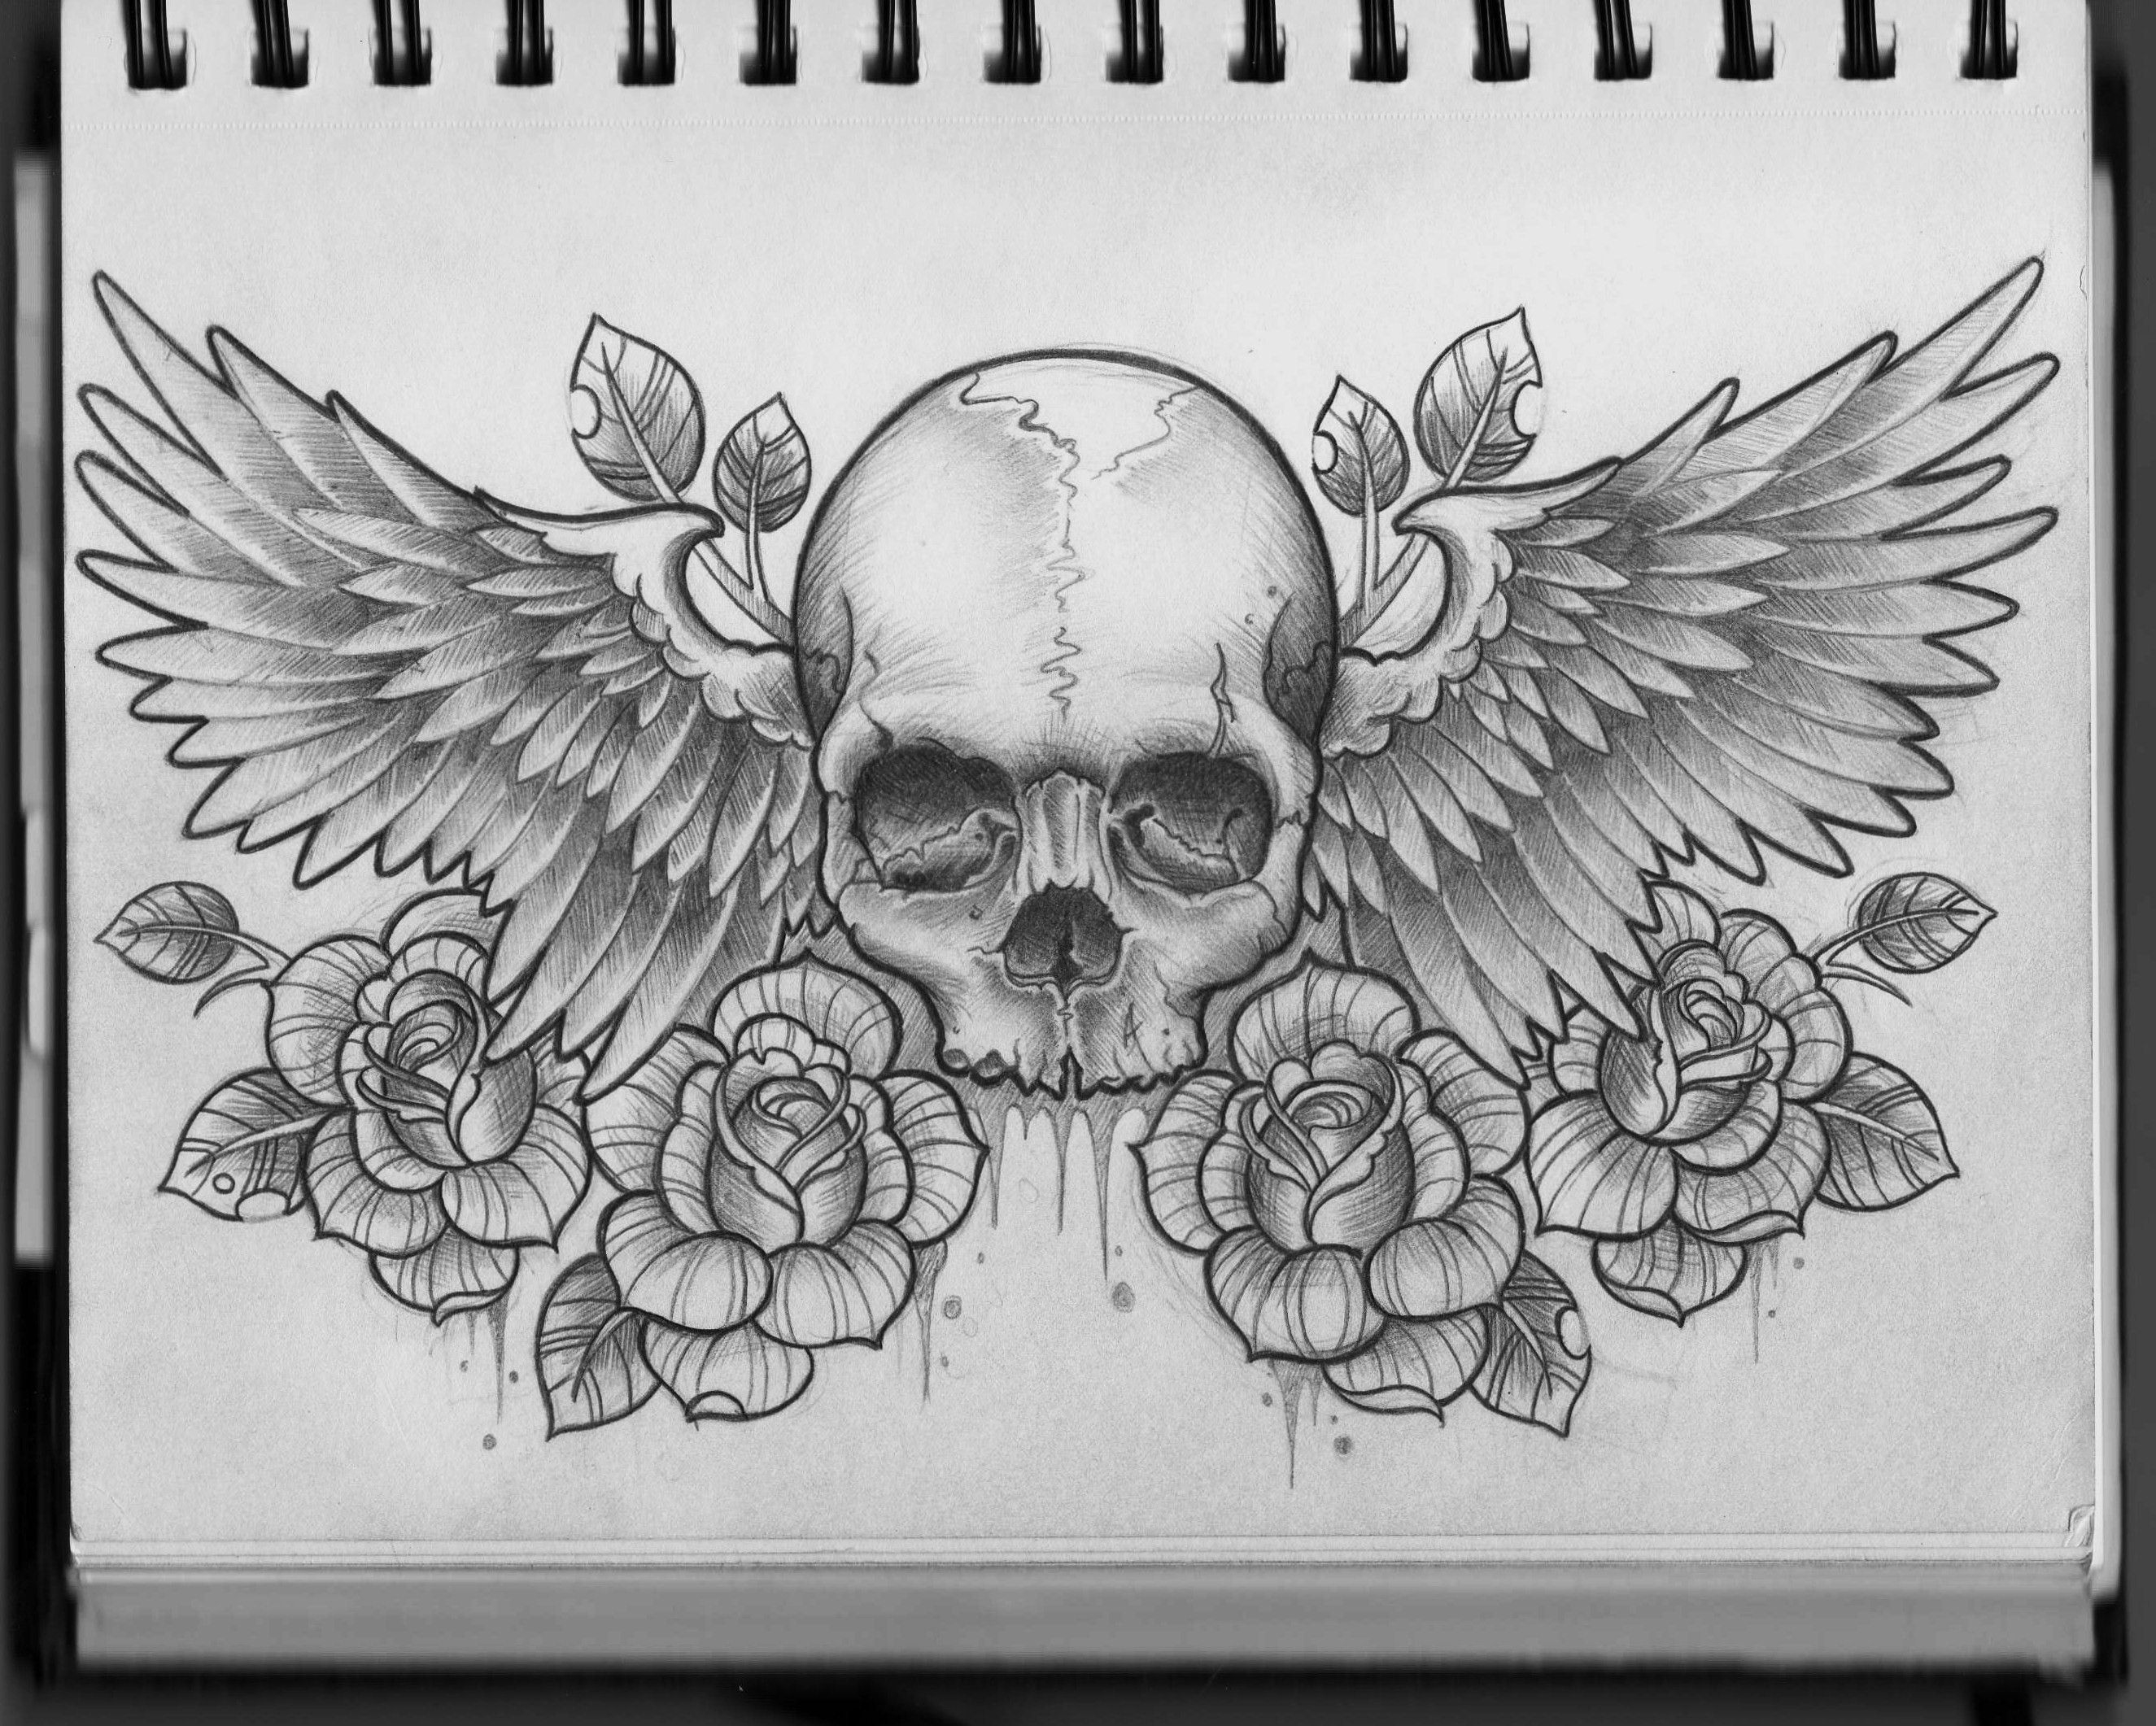 Skull And Wings Chest Design Ink Filigree Tattoo Tattoos Chest pertaining to size 2650 X 2122